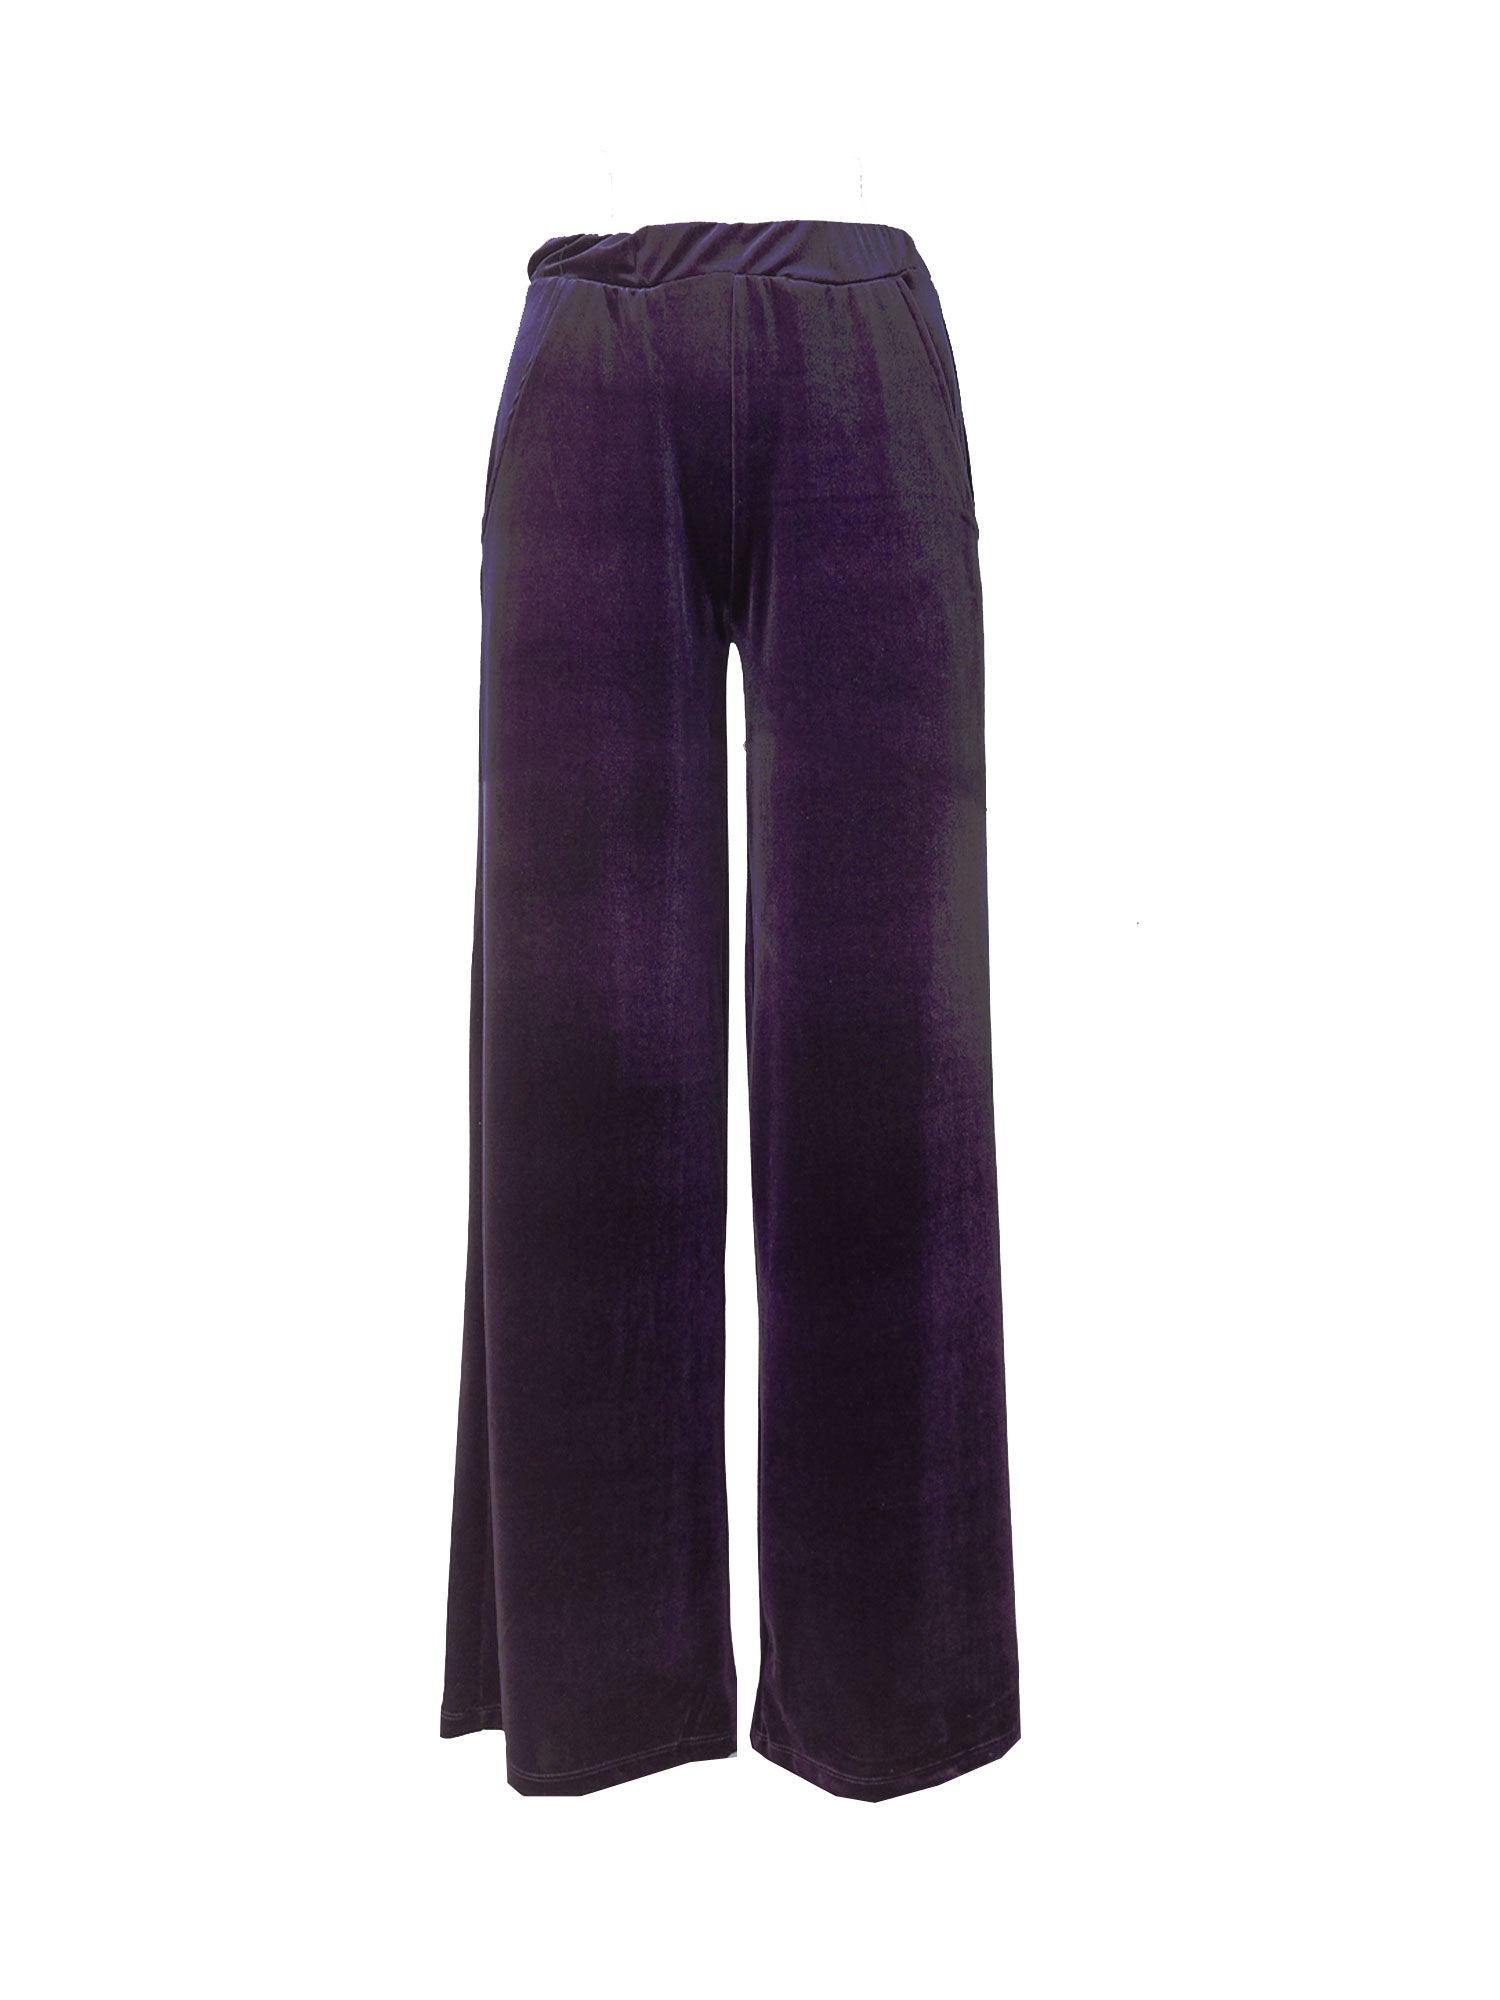 MAXIE - palazzo trousers with side pockets in purple chenille